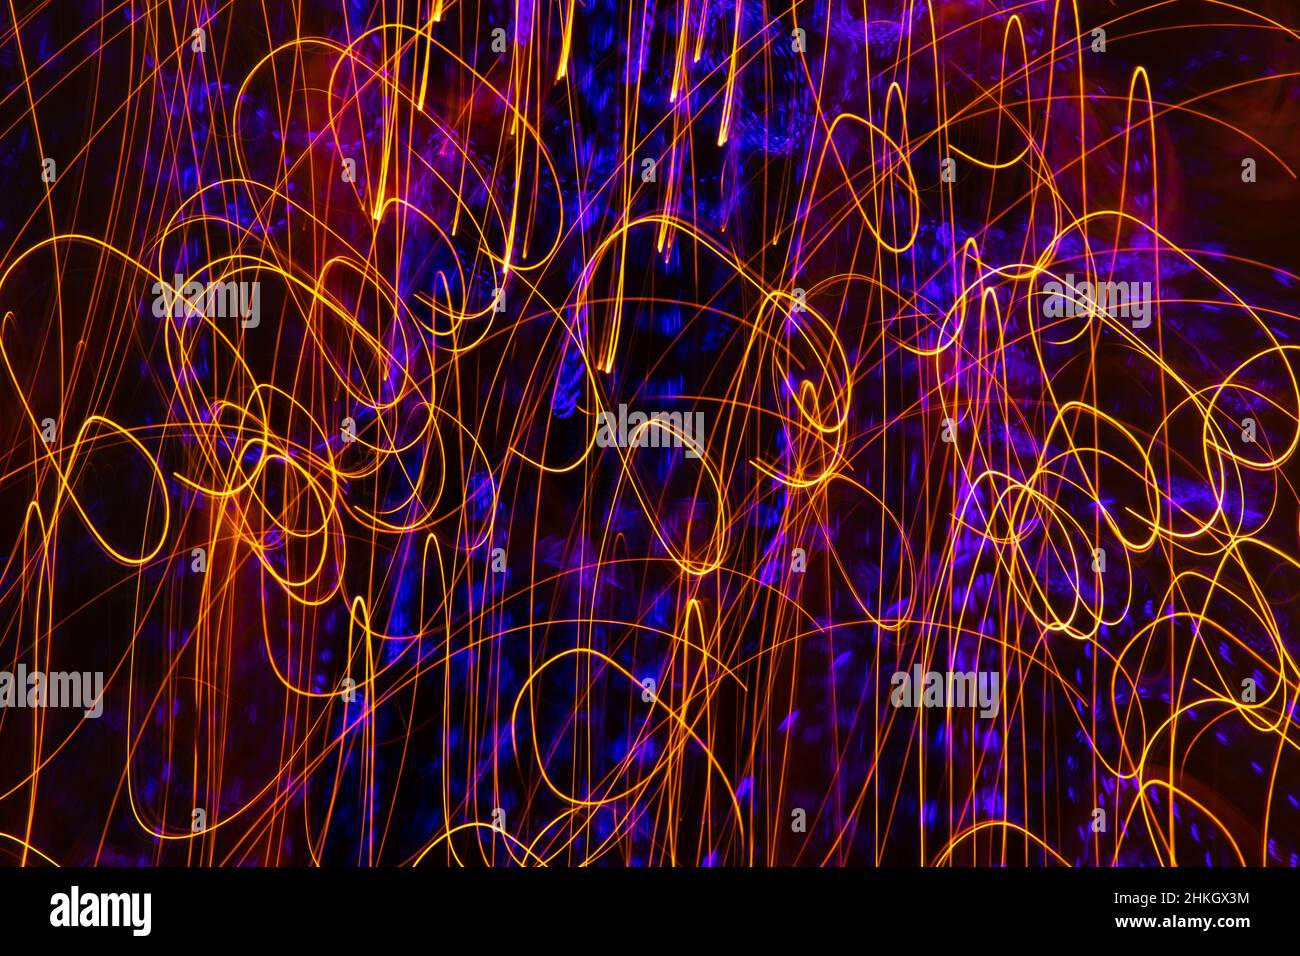 colorful streaks designs ights special effect background created by long time exposure and intentional camera movement creating motion horizontal Stock Photo